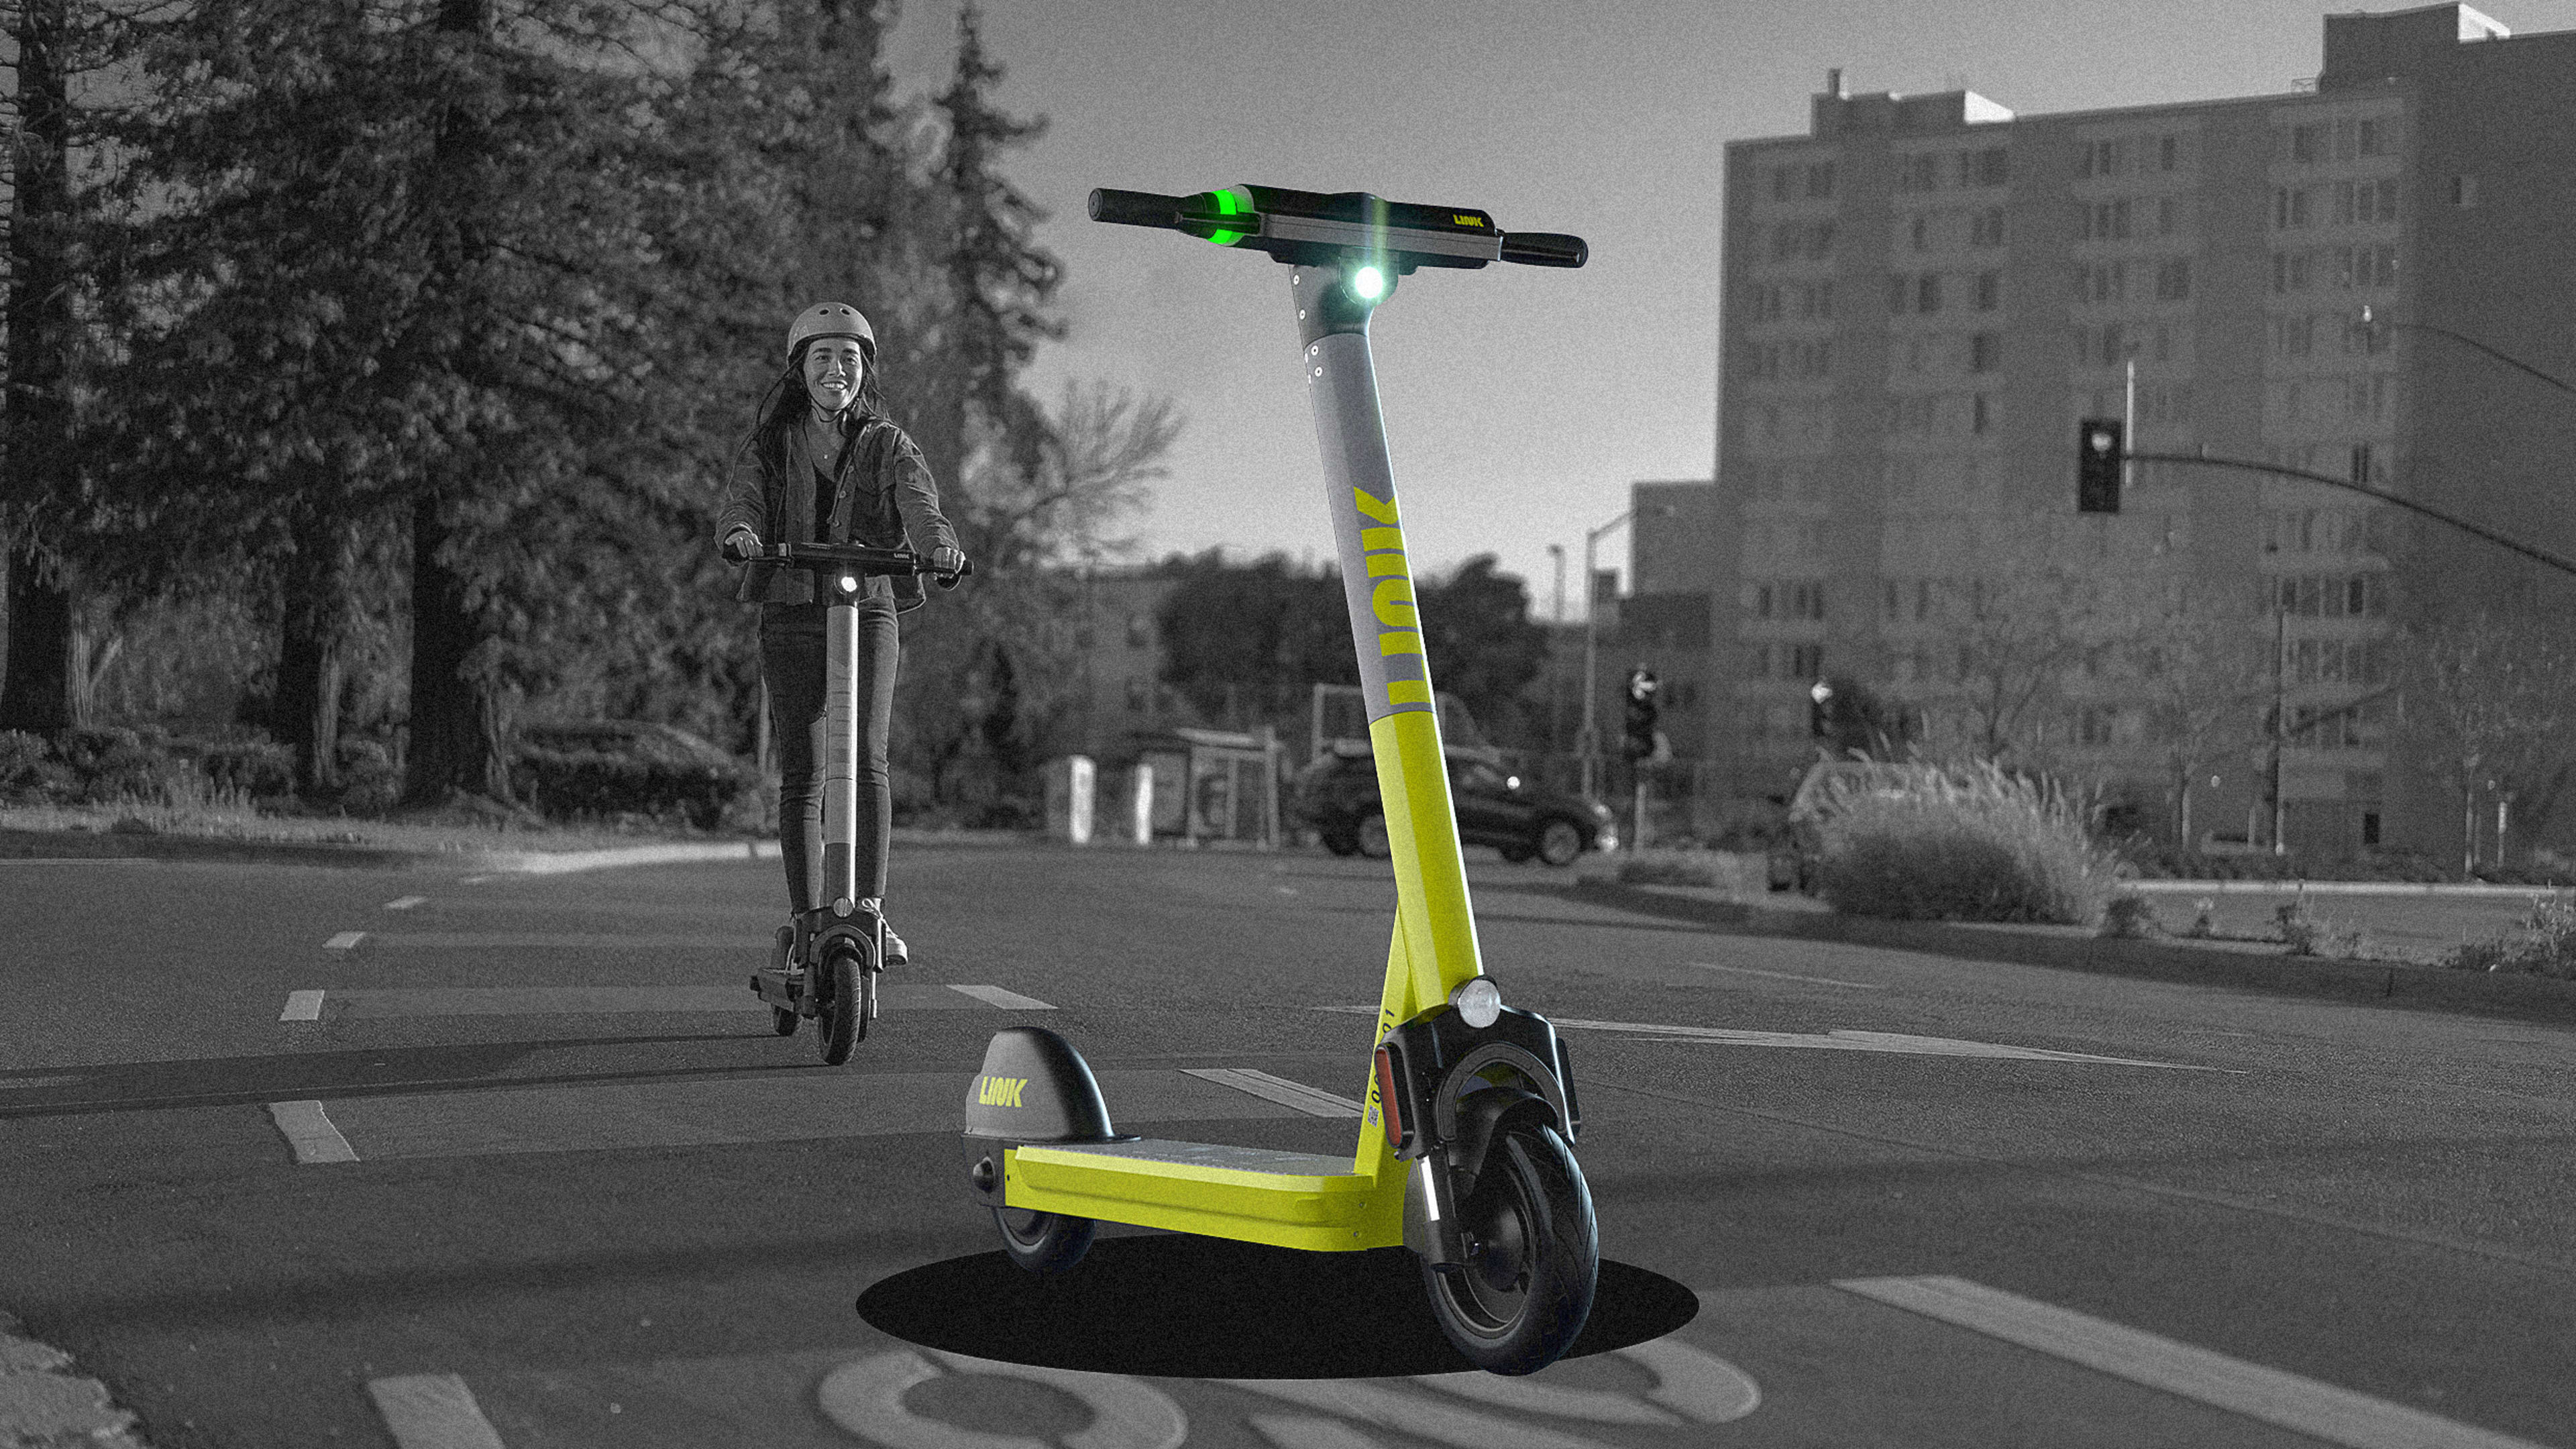 Dystopian or necessary? This company can stop dangerous e-scooters remotely